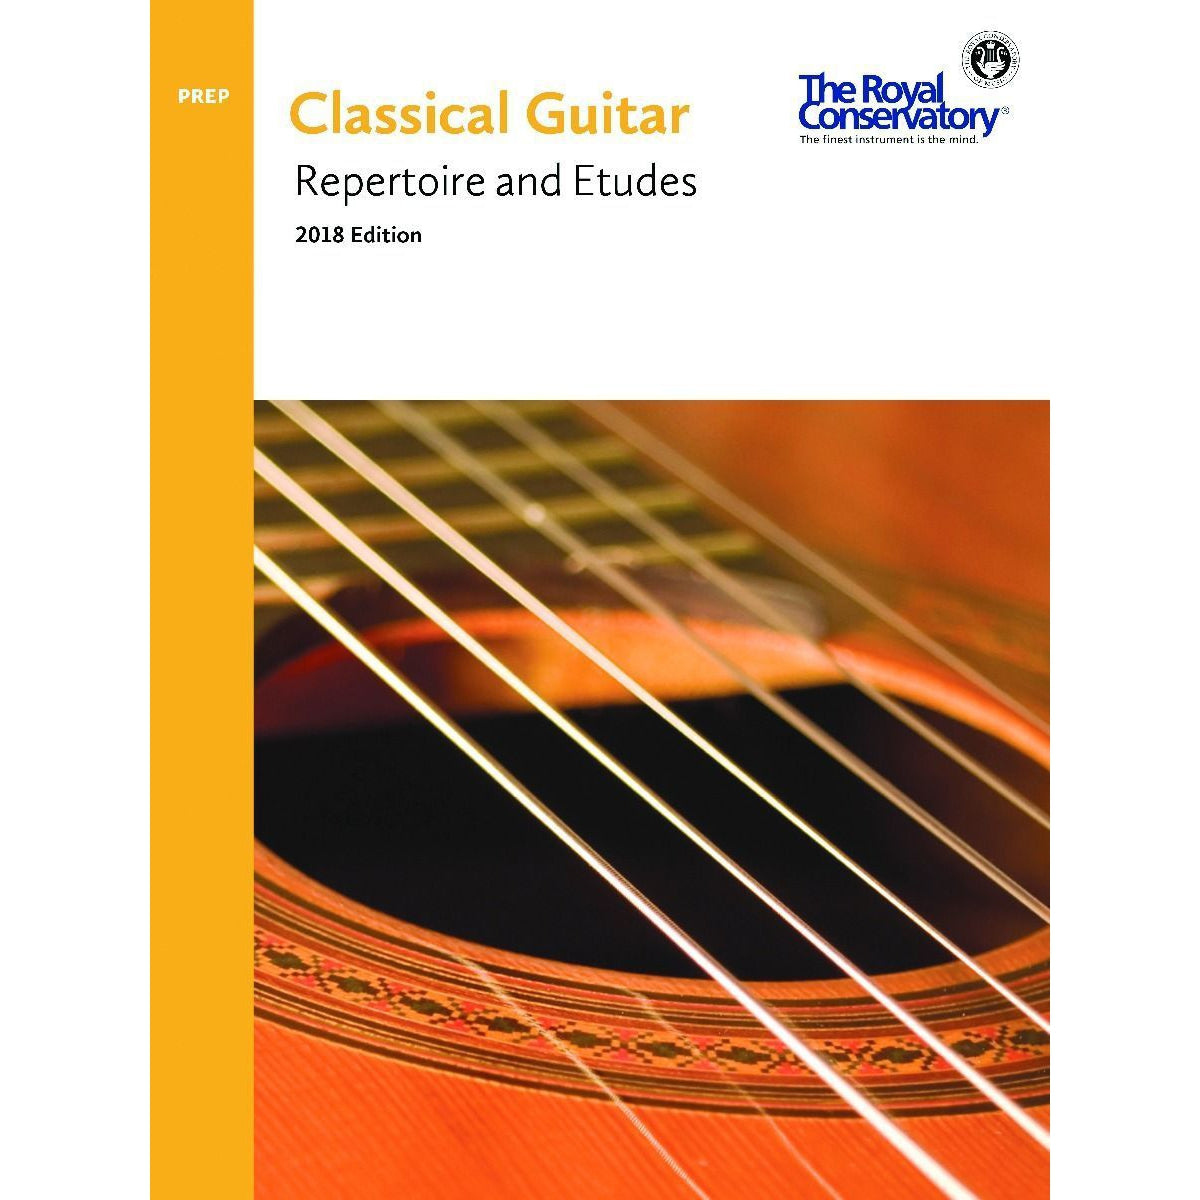 The Royal Conservatory Preparatory Classical Guitar Repertoire and Etudes 2018 Edition-Music World Academy